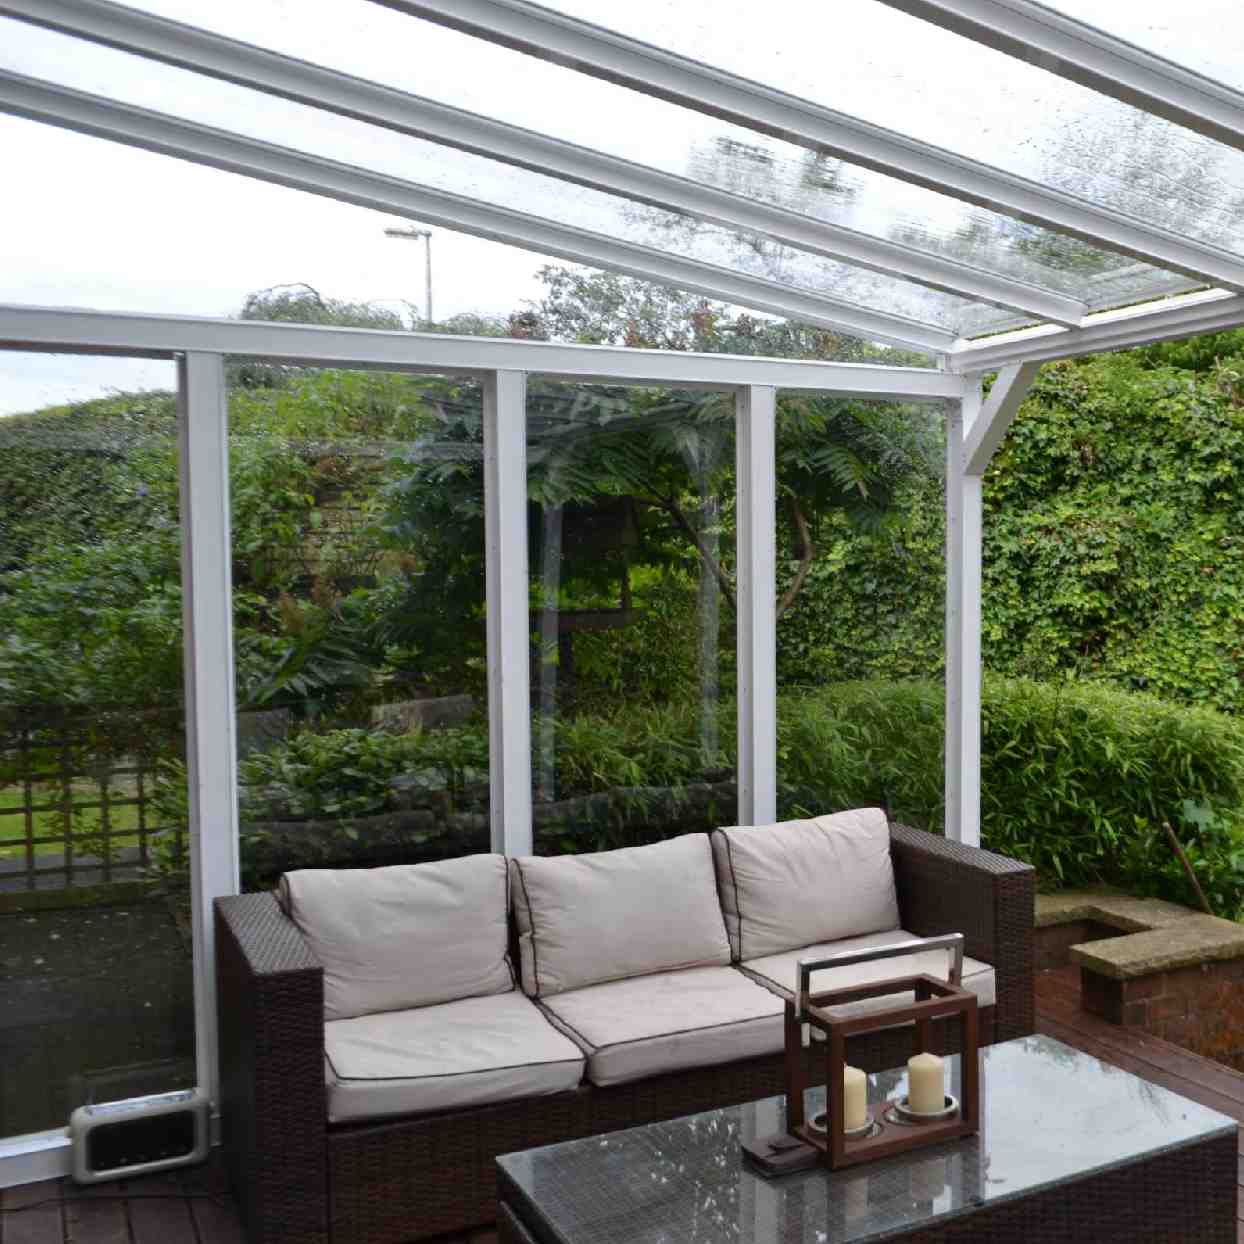 Buy Omega Verandah White with 6mm Glass Clear Plate Polycarbonate Glazing - 9.8m (W) x 3.0m (P), (5) Supporting Posts online today